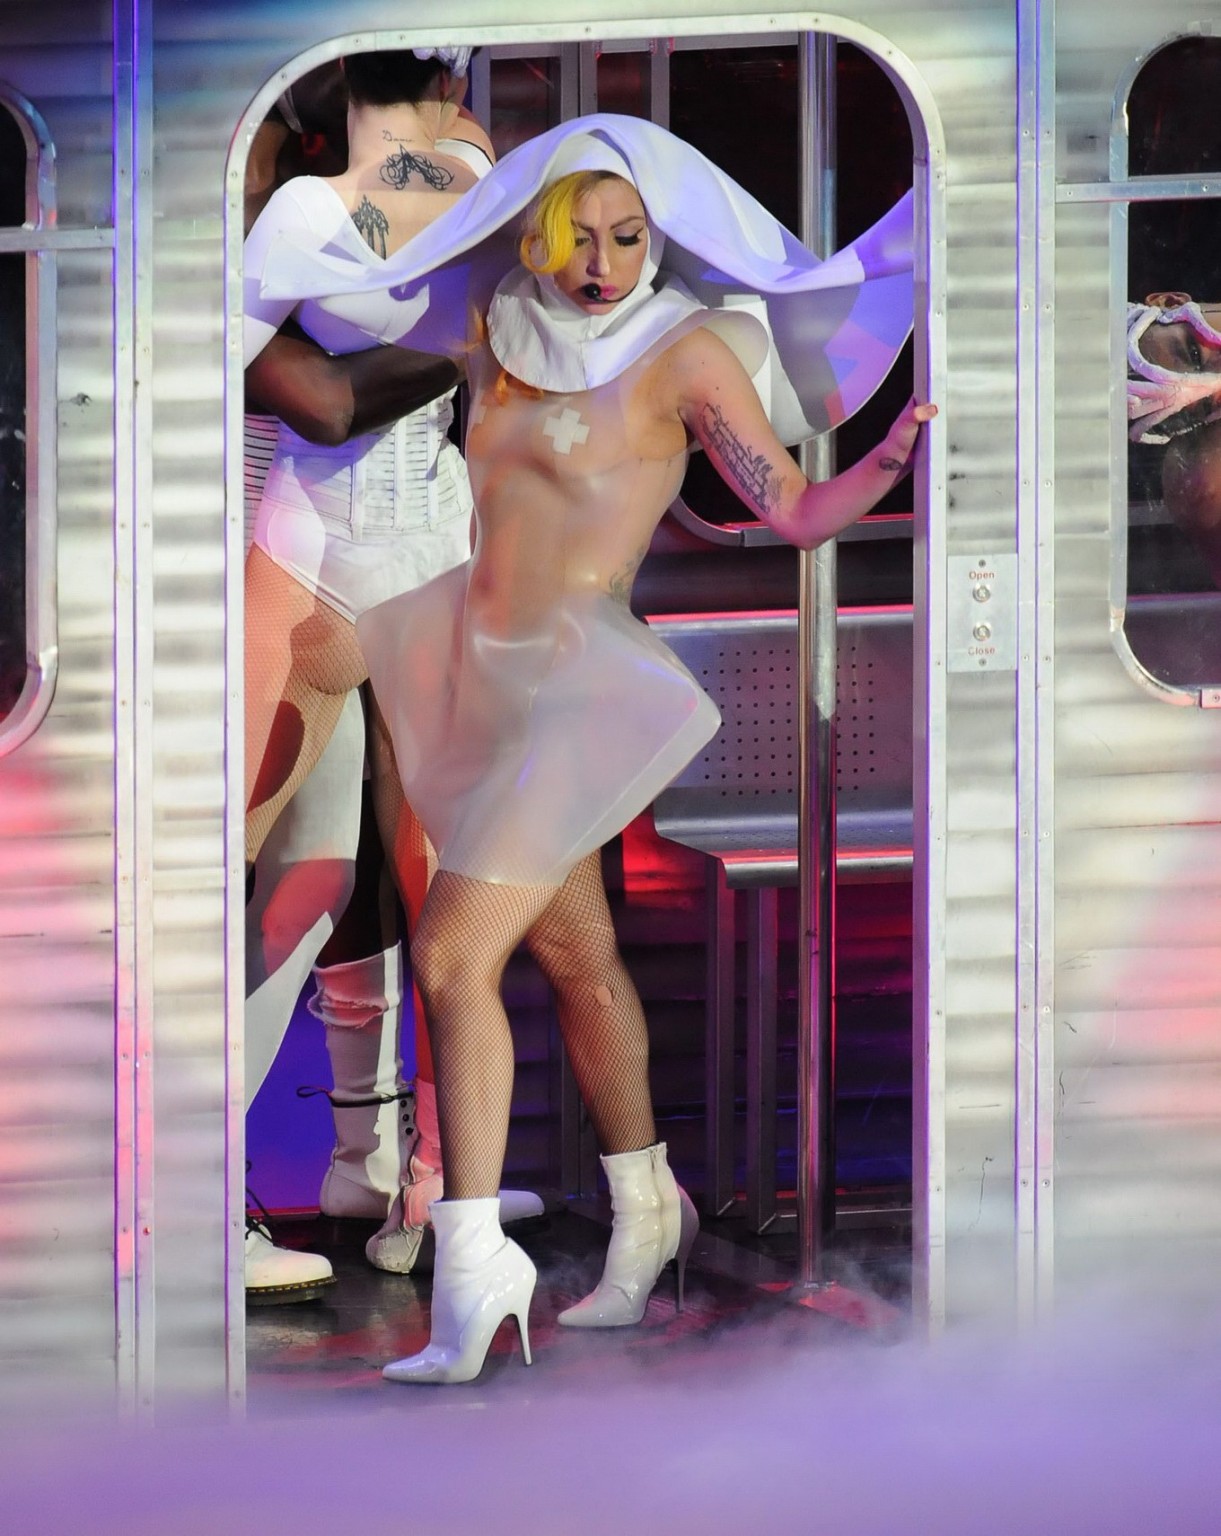 Lady Gaga in see through outfit with taped nipples performing at the 02 Arena in #75323337